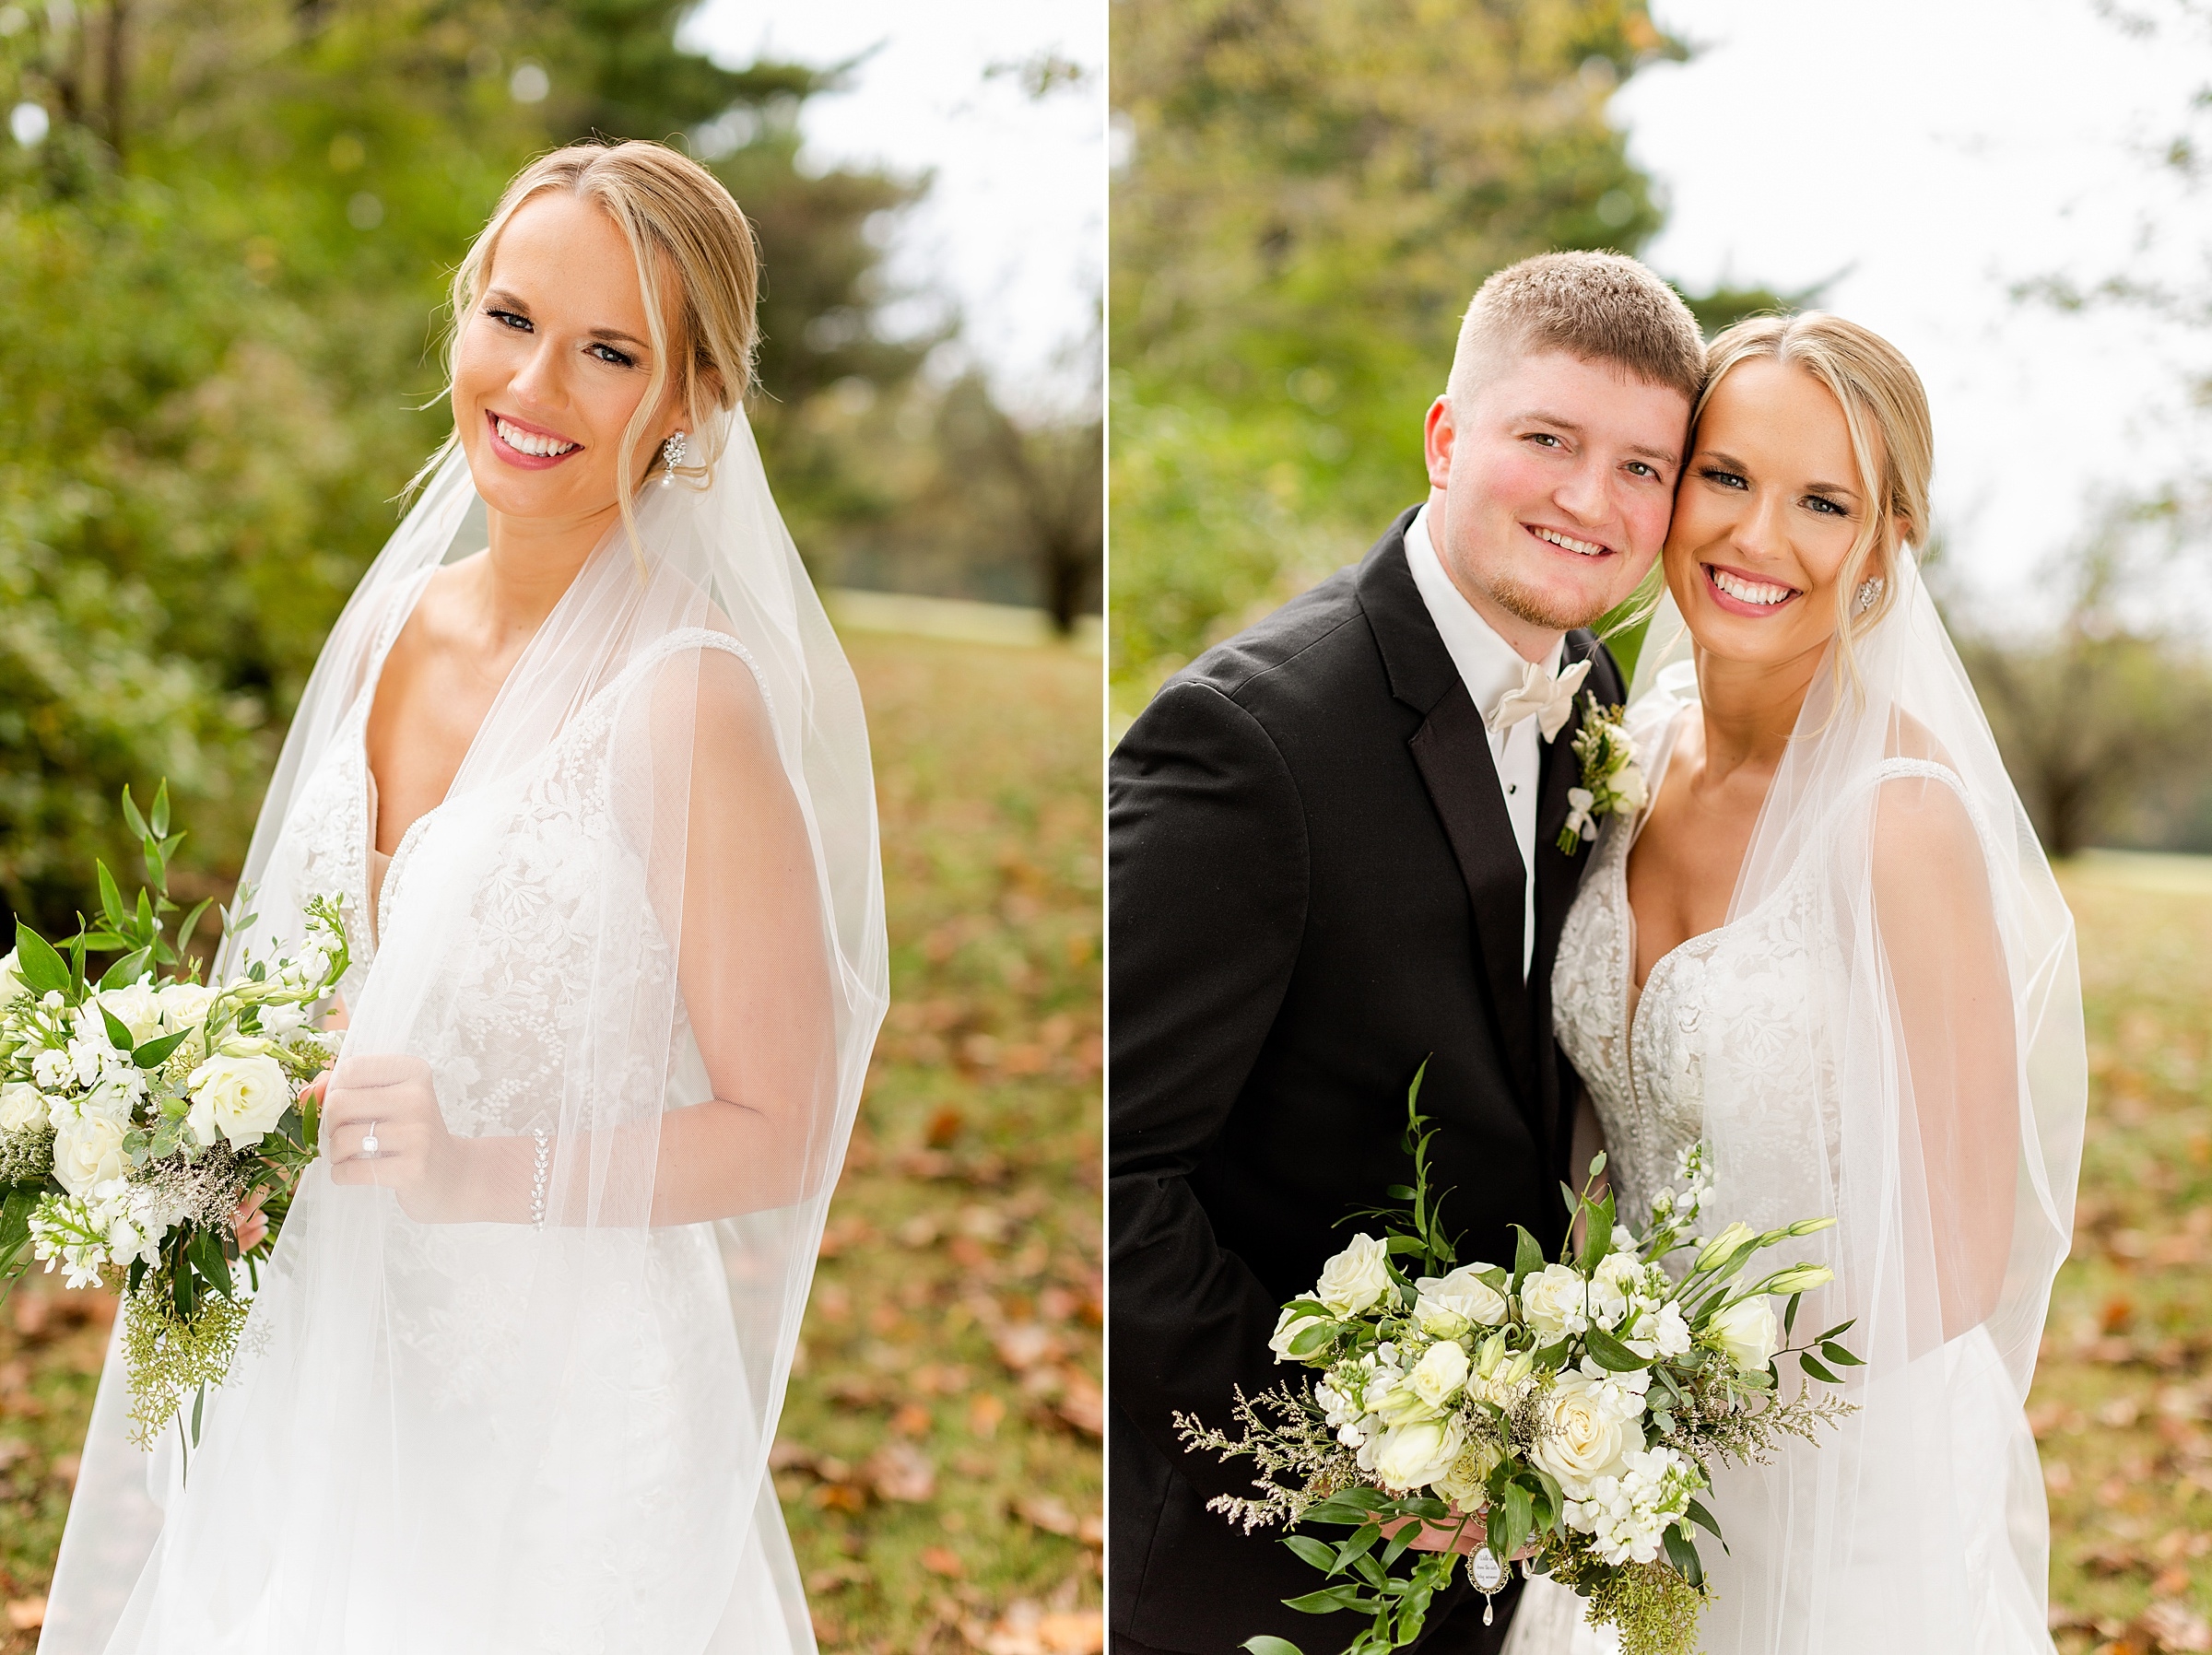 Hannah and Cody's Wedding in Booneville, IN109.jpg